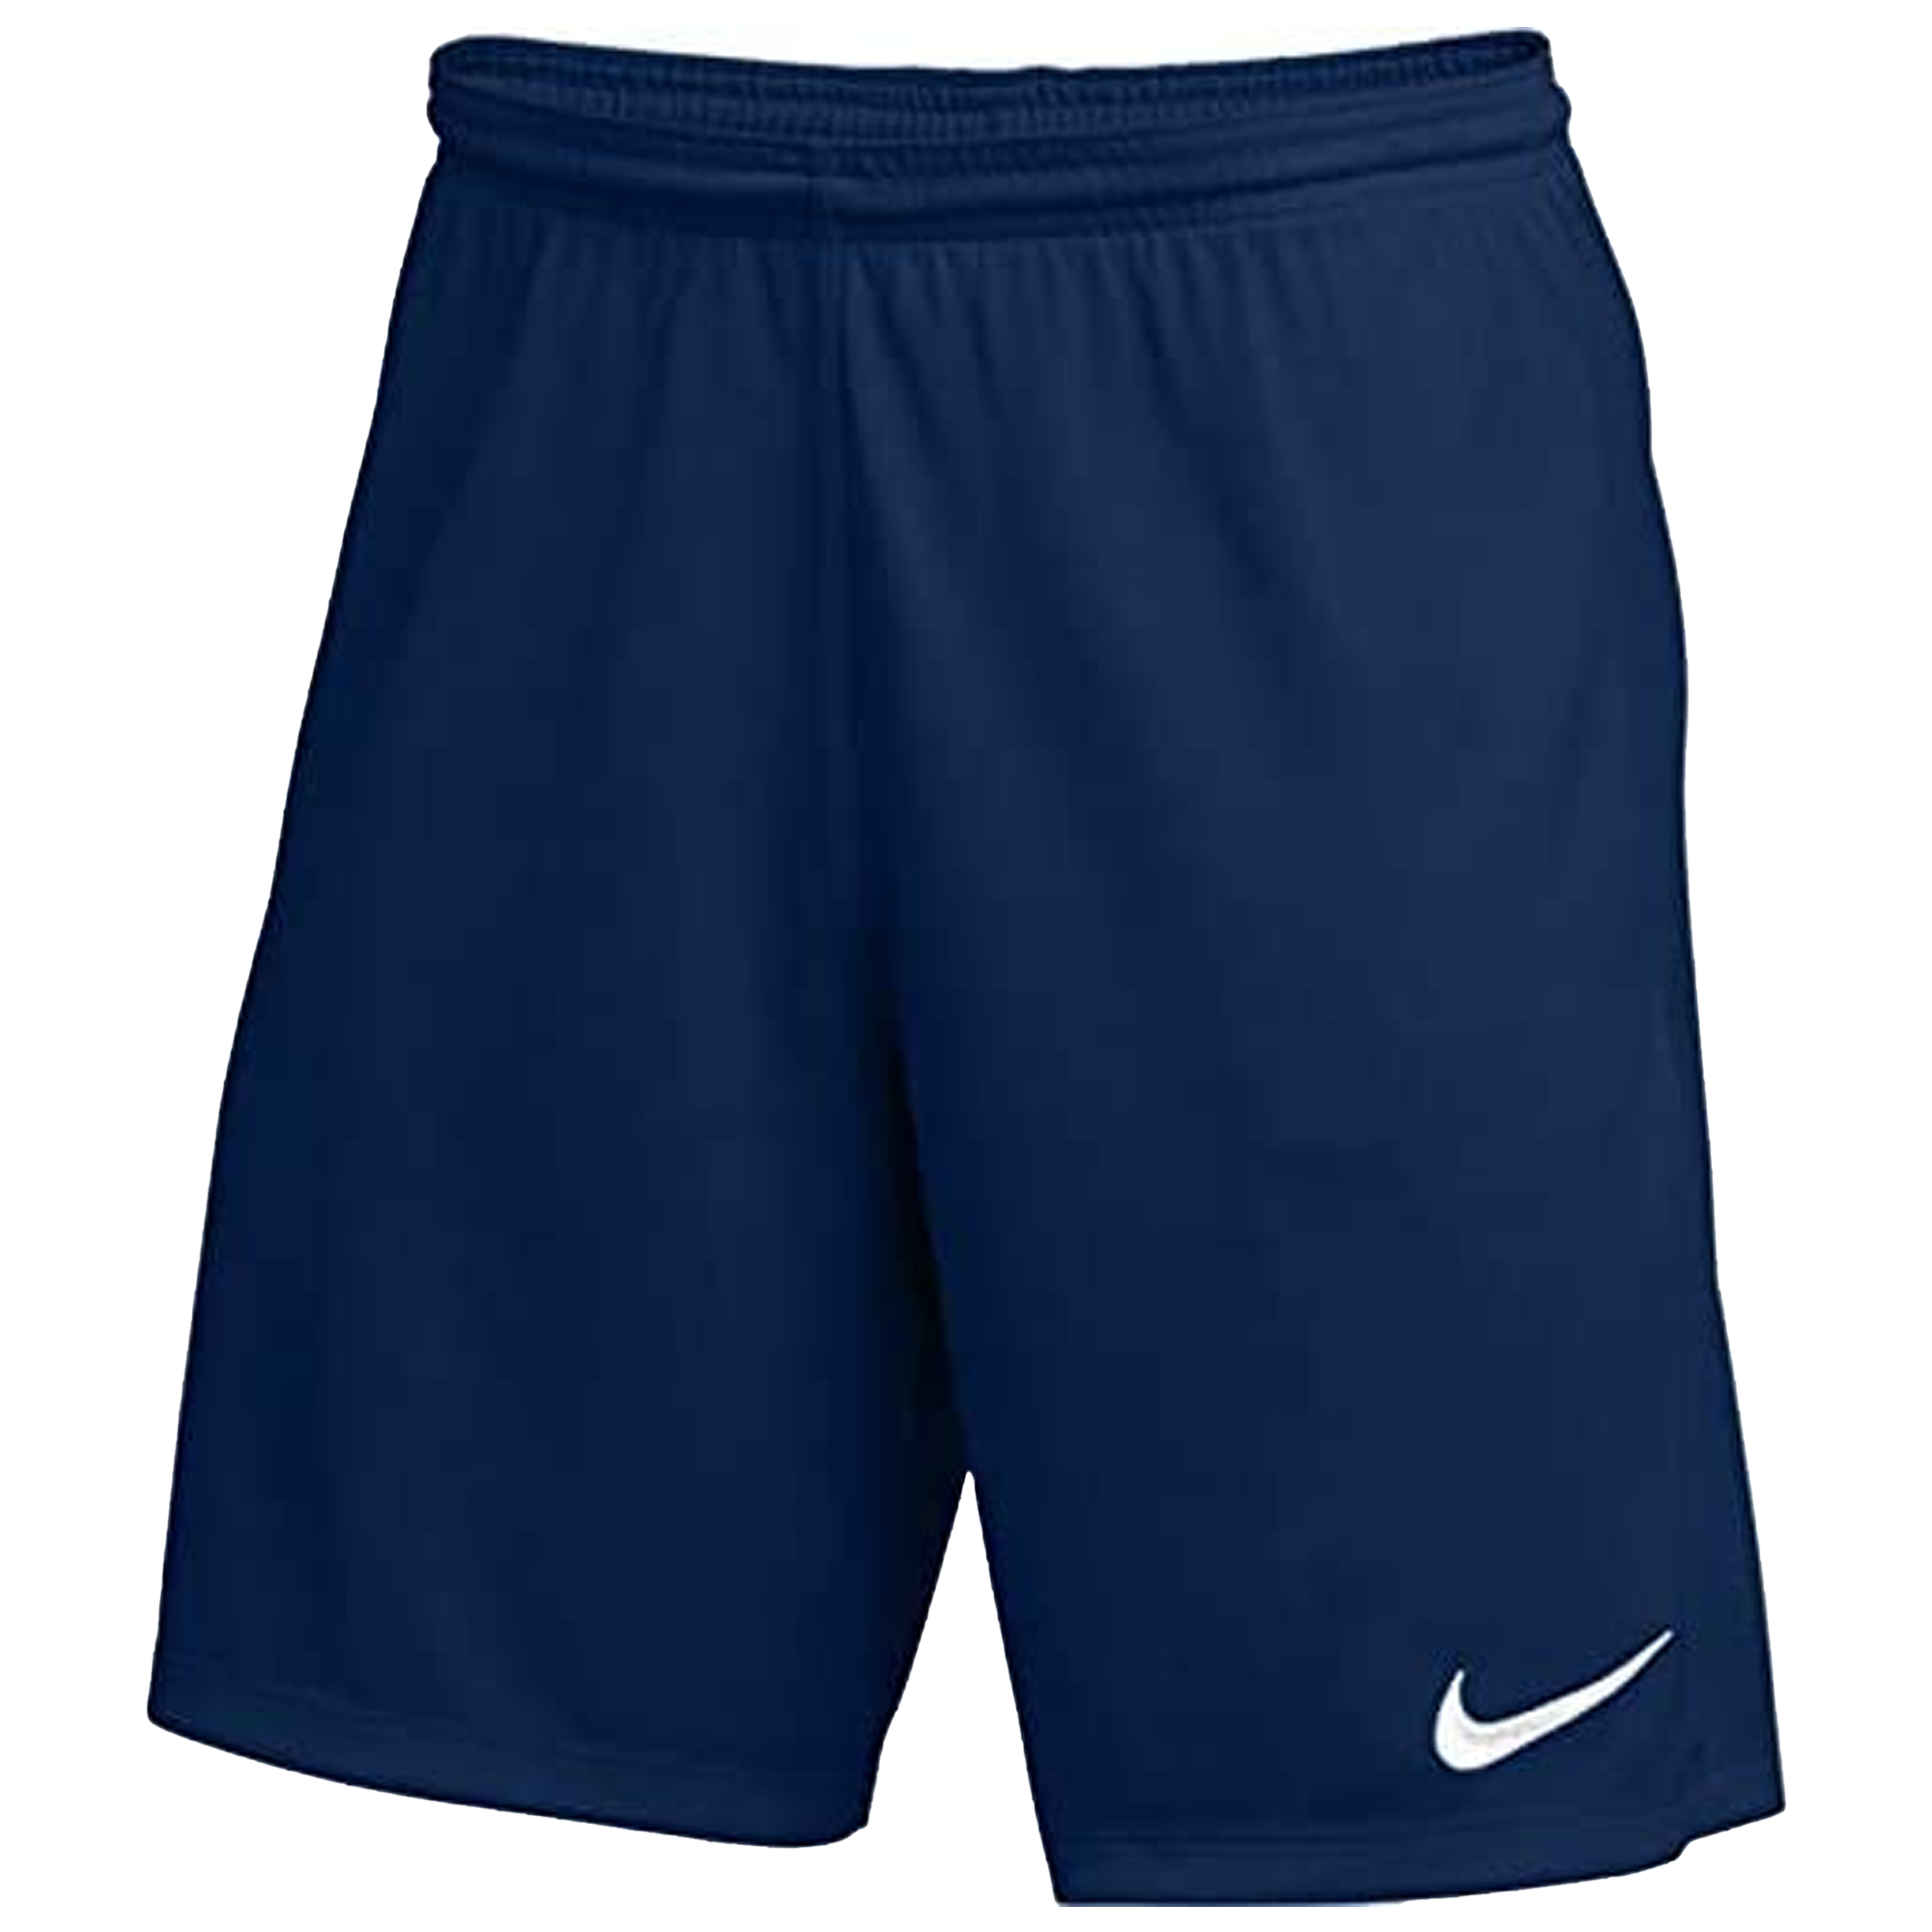 stefanssoccer.com:Nike Youth III Shorts Navy / White